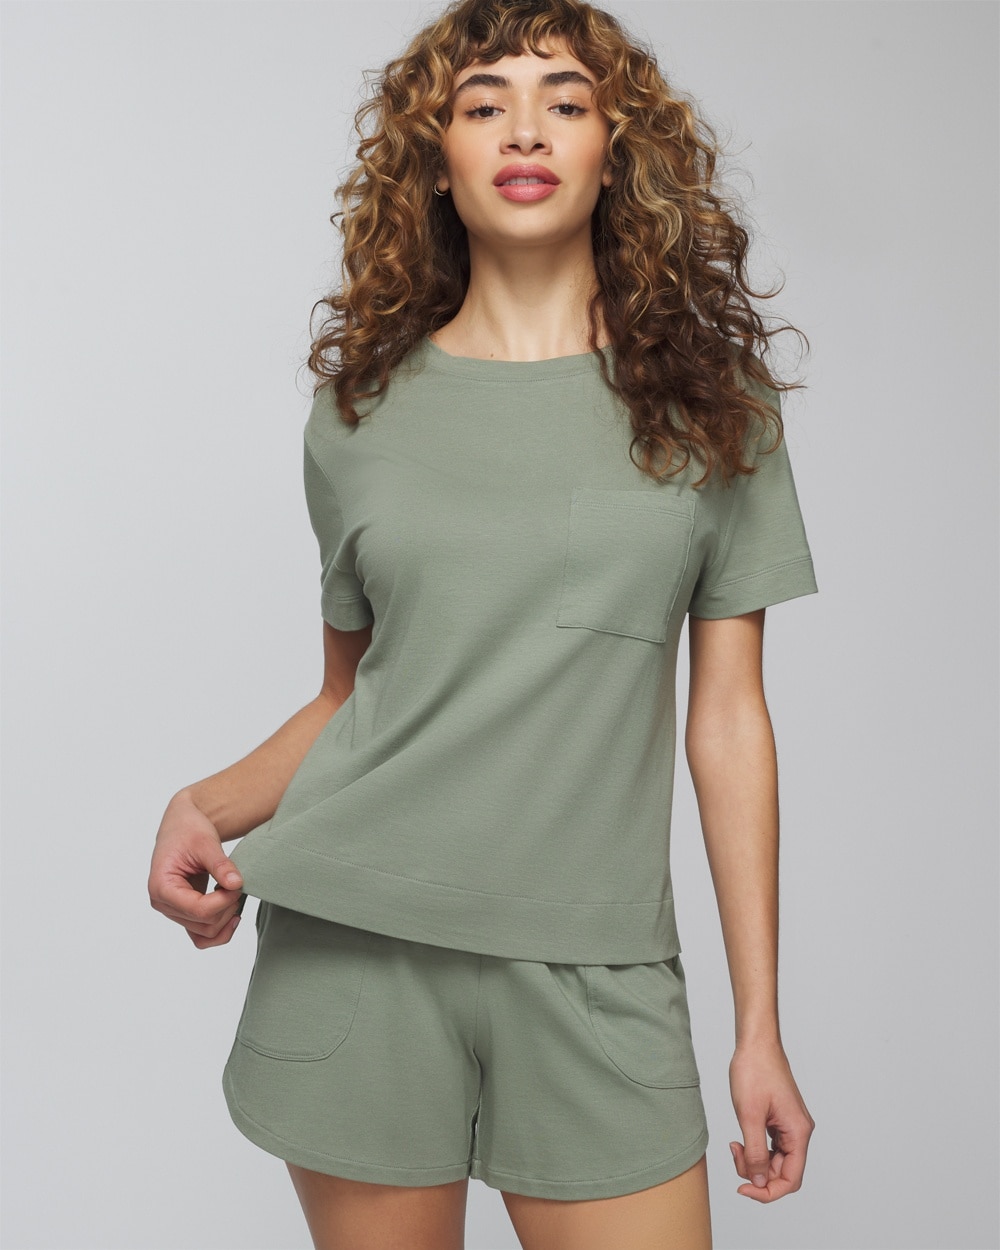 Most Loved Cotton Short-Sleeve Pocket Tee